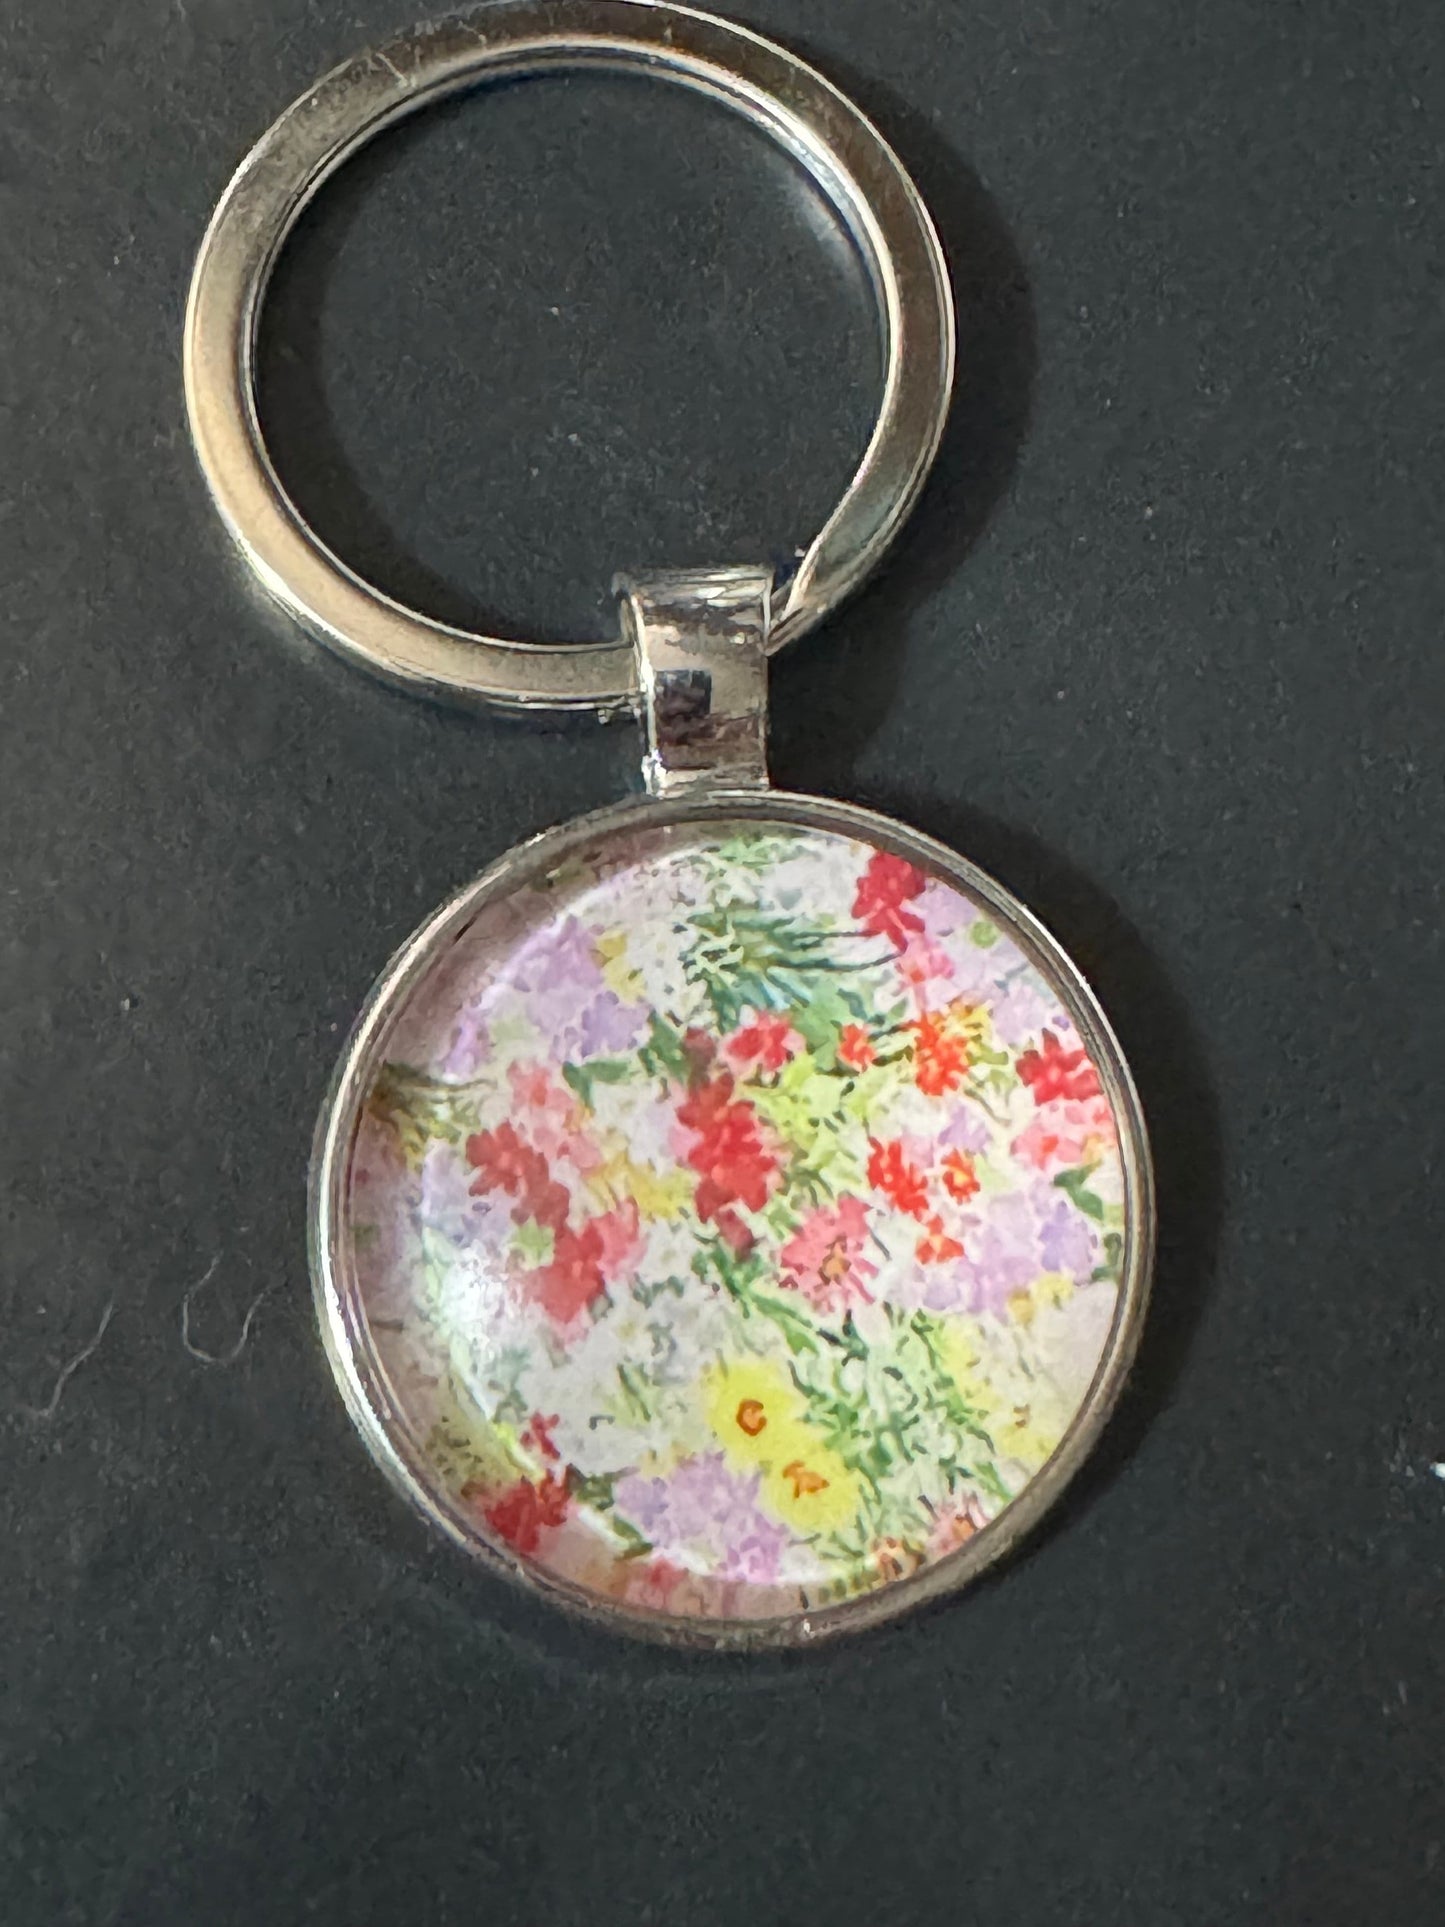 Handmade garden yellow Pink flowers silver tone floral keyring with 25mm glass cabochon